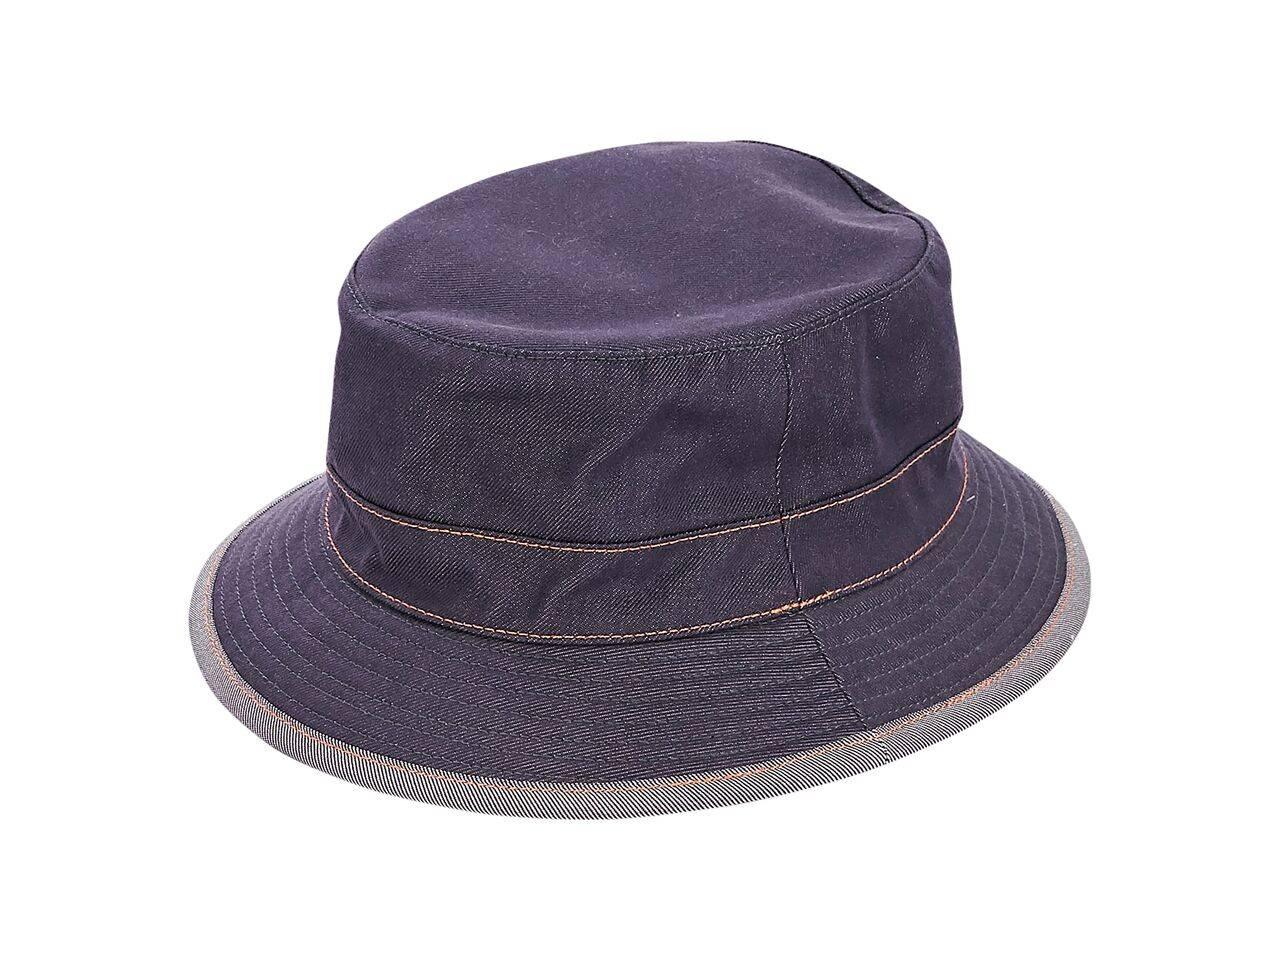 Product details:  Blue denim bucket hat by Hermes.  Lined interior.  Size 58.  3.25